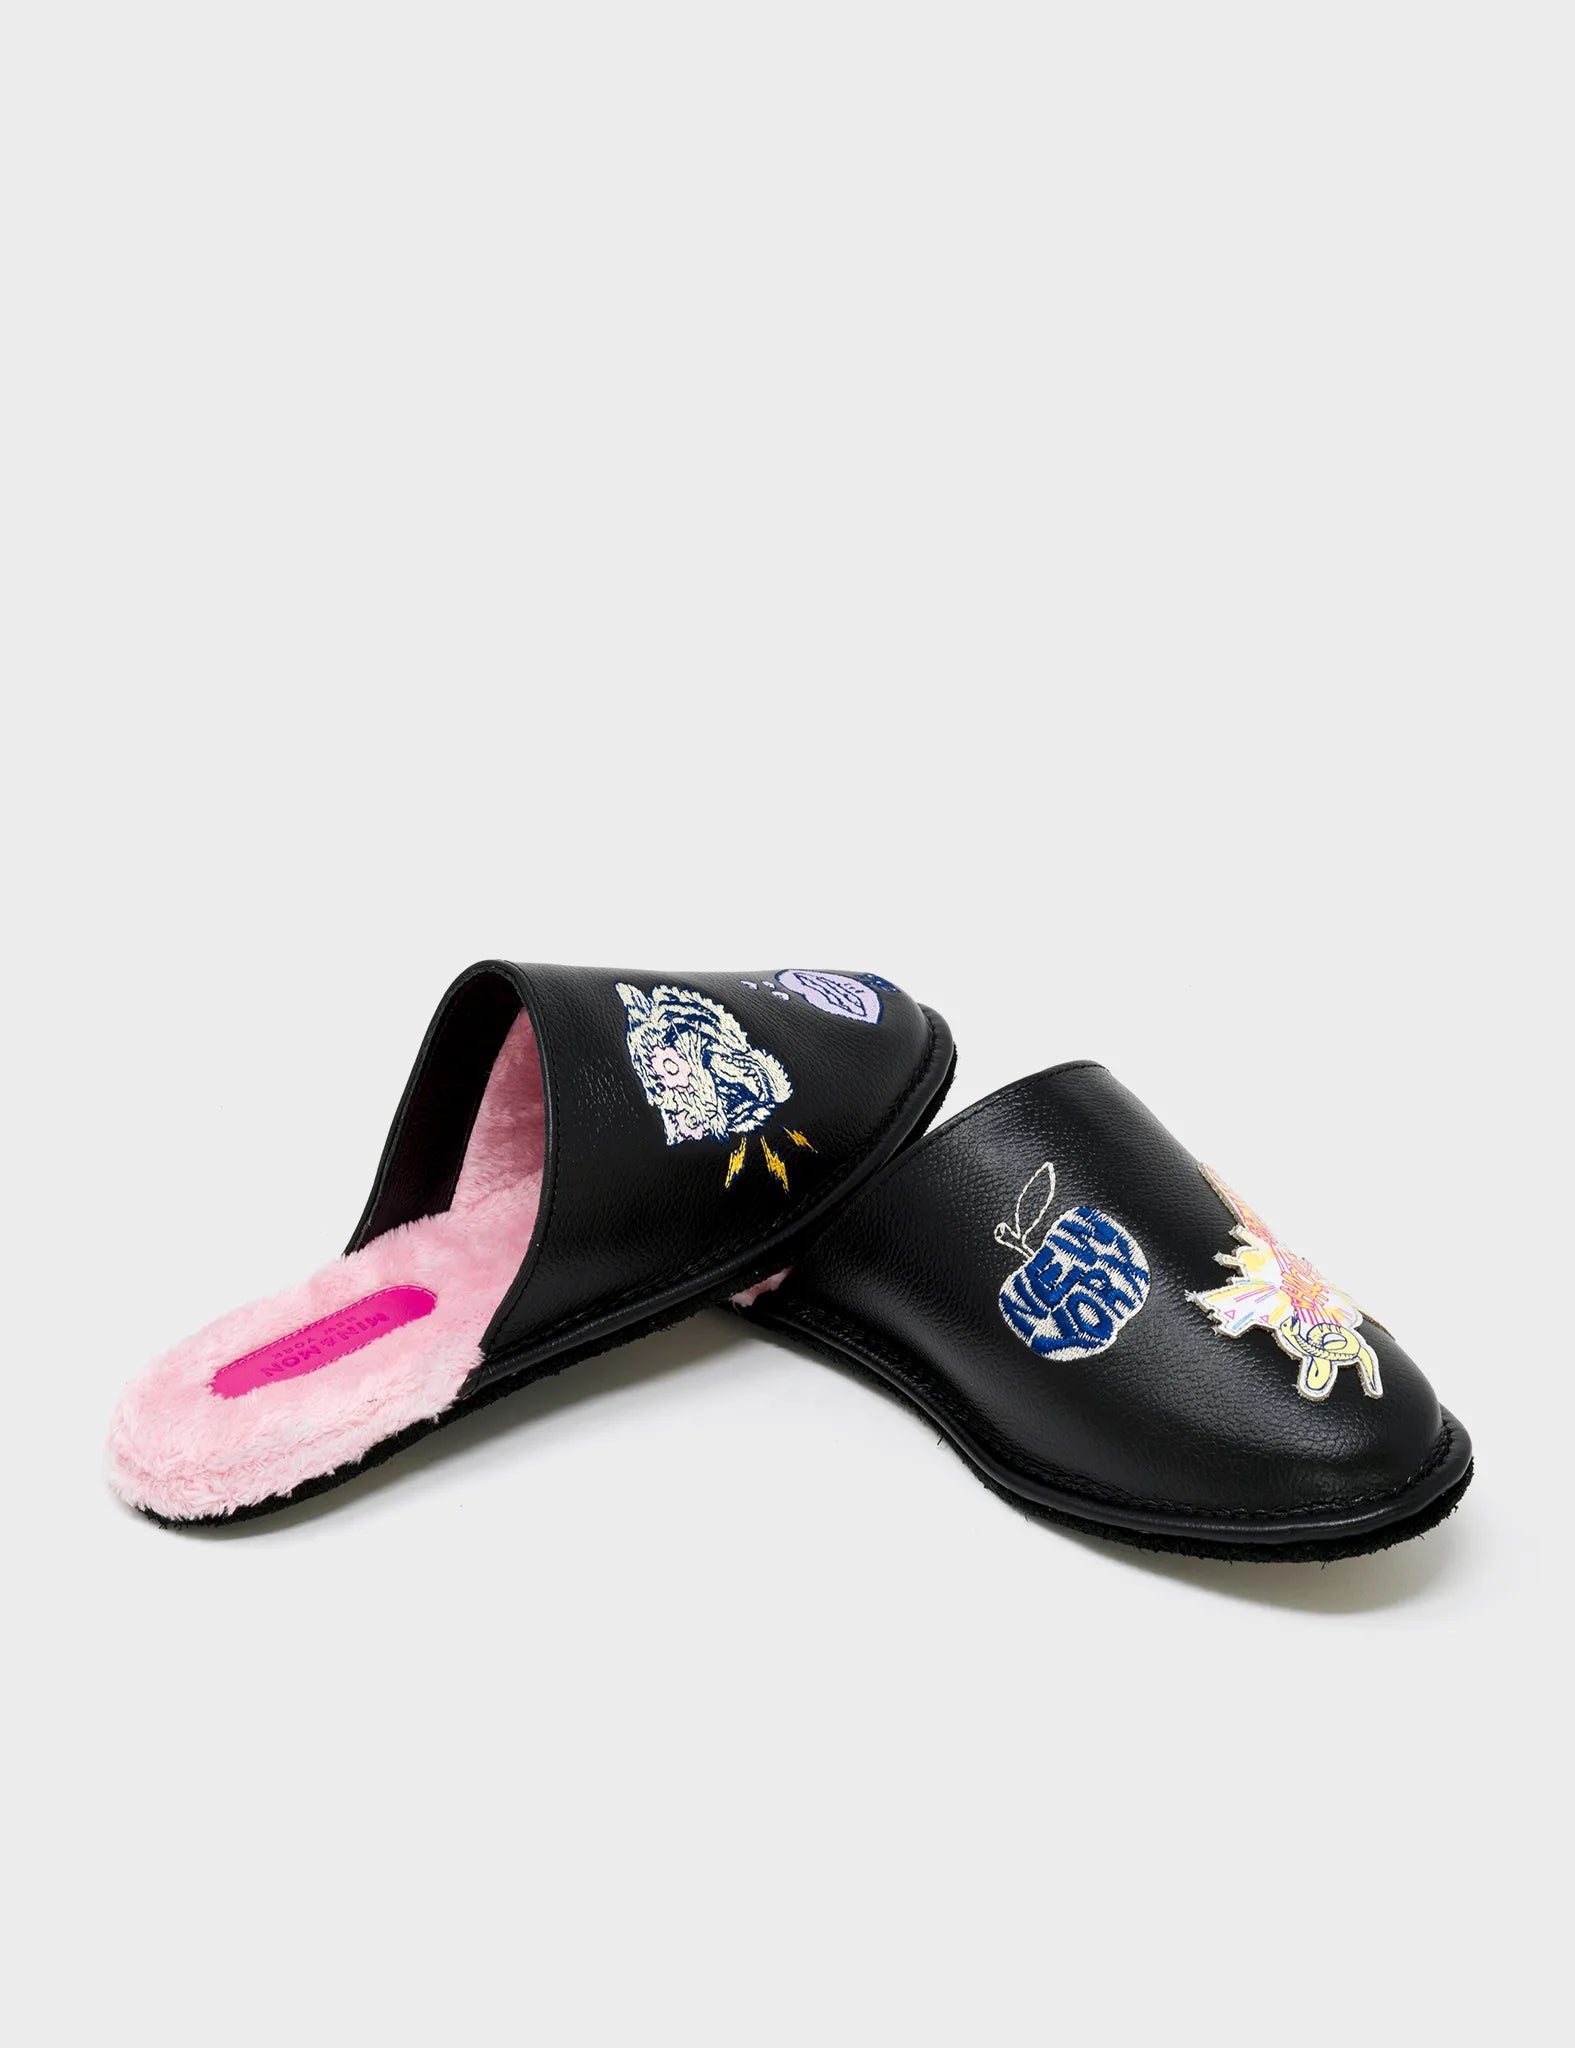  Black Leather Slippers - Tiger Power Embroidery - side